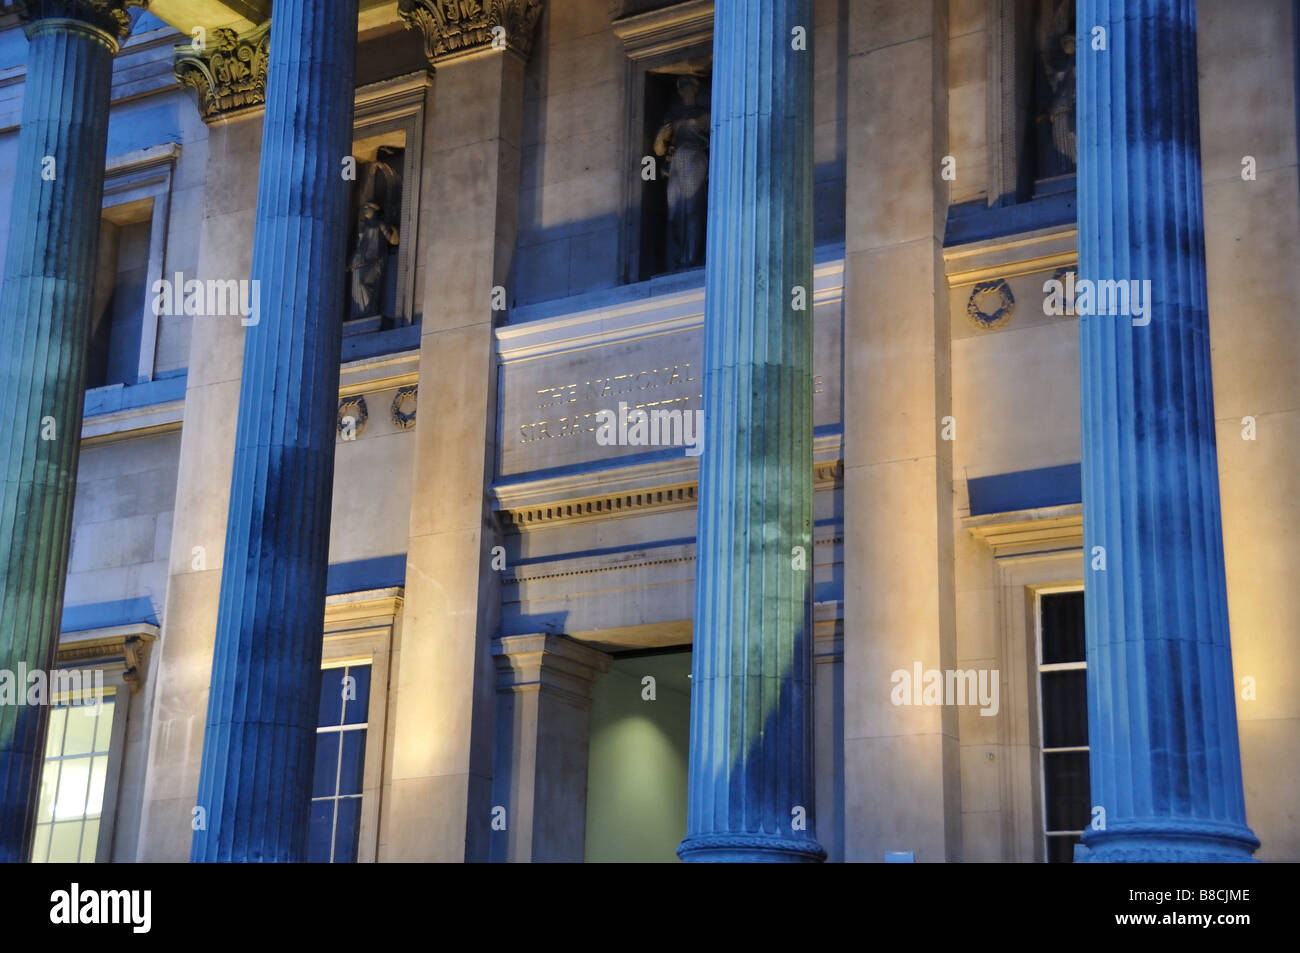 The 'Sir Paul Getty Entrance' of The National Gallery at night, London, England. Stock Photo